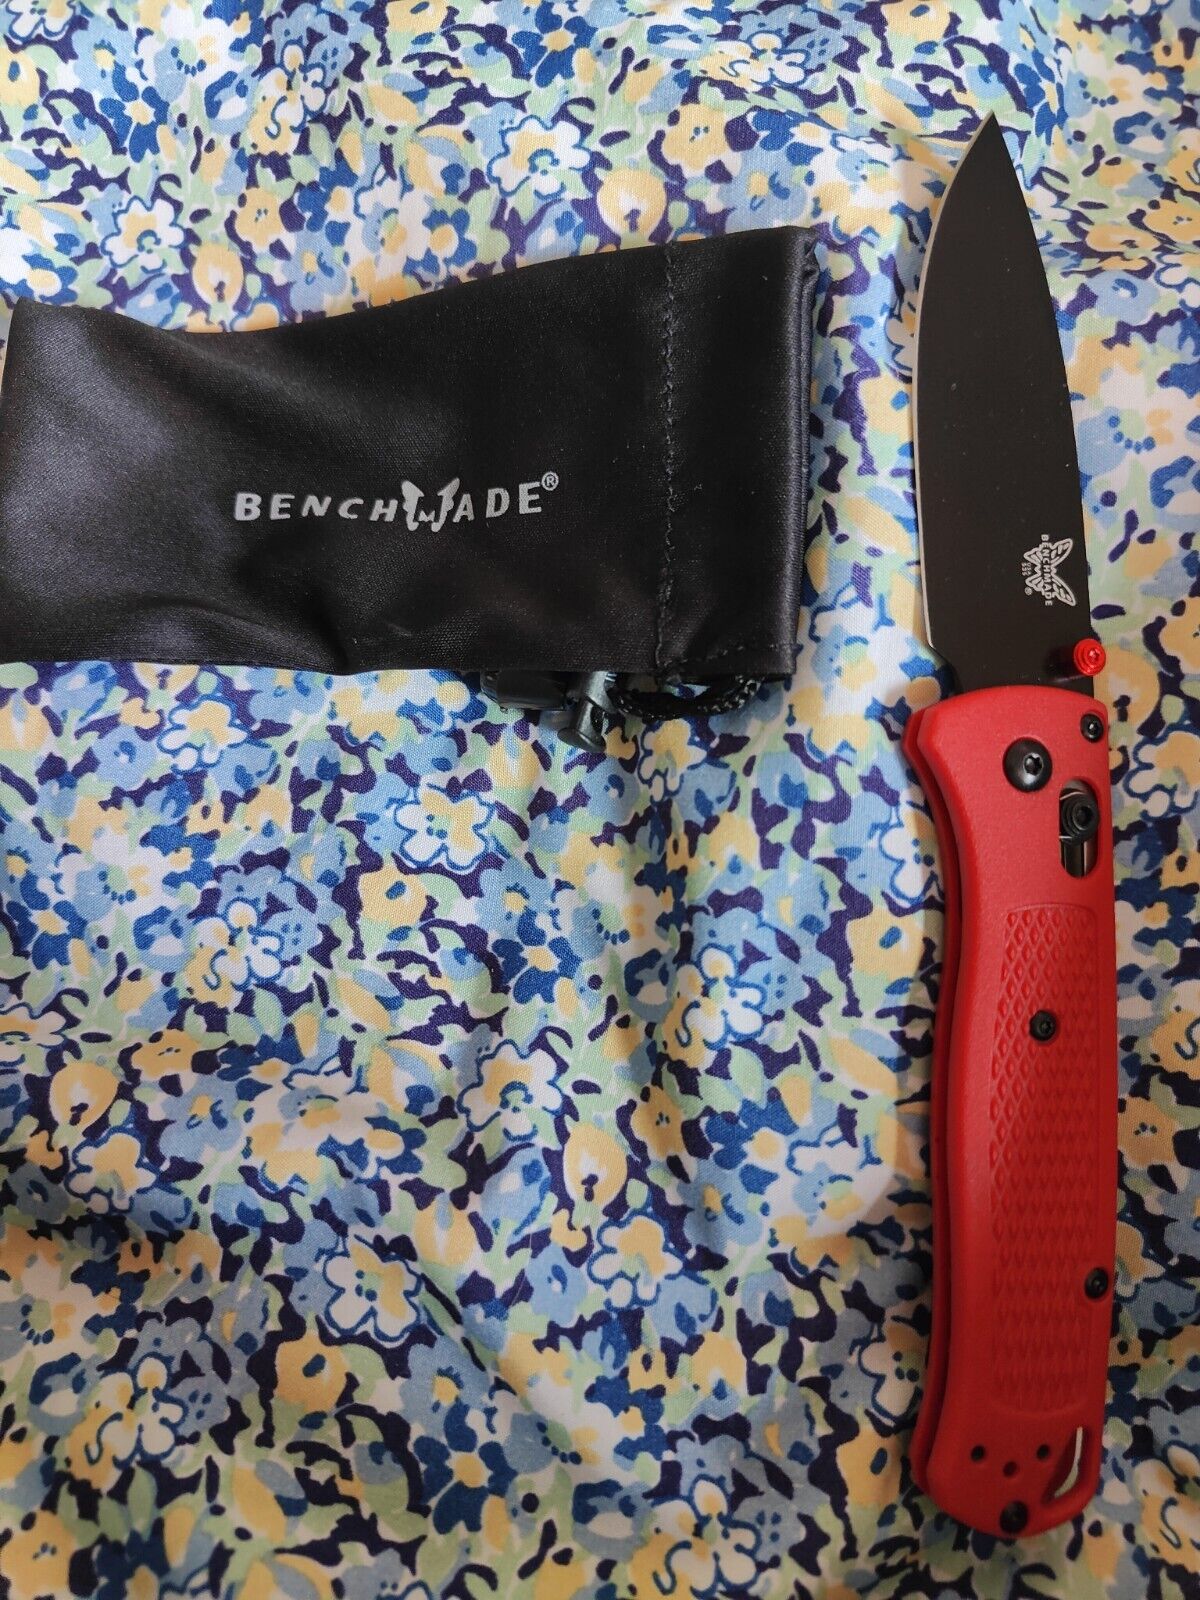 Benchmade bugout(Used) Red g10 handle, black blade